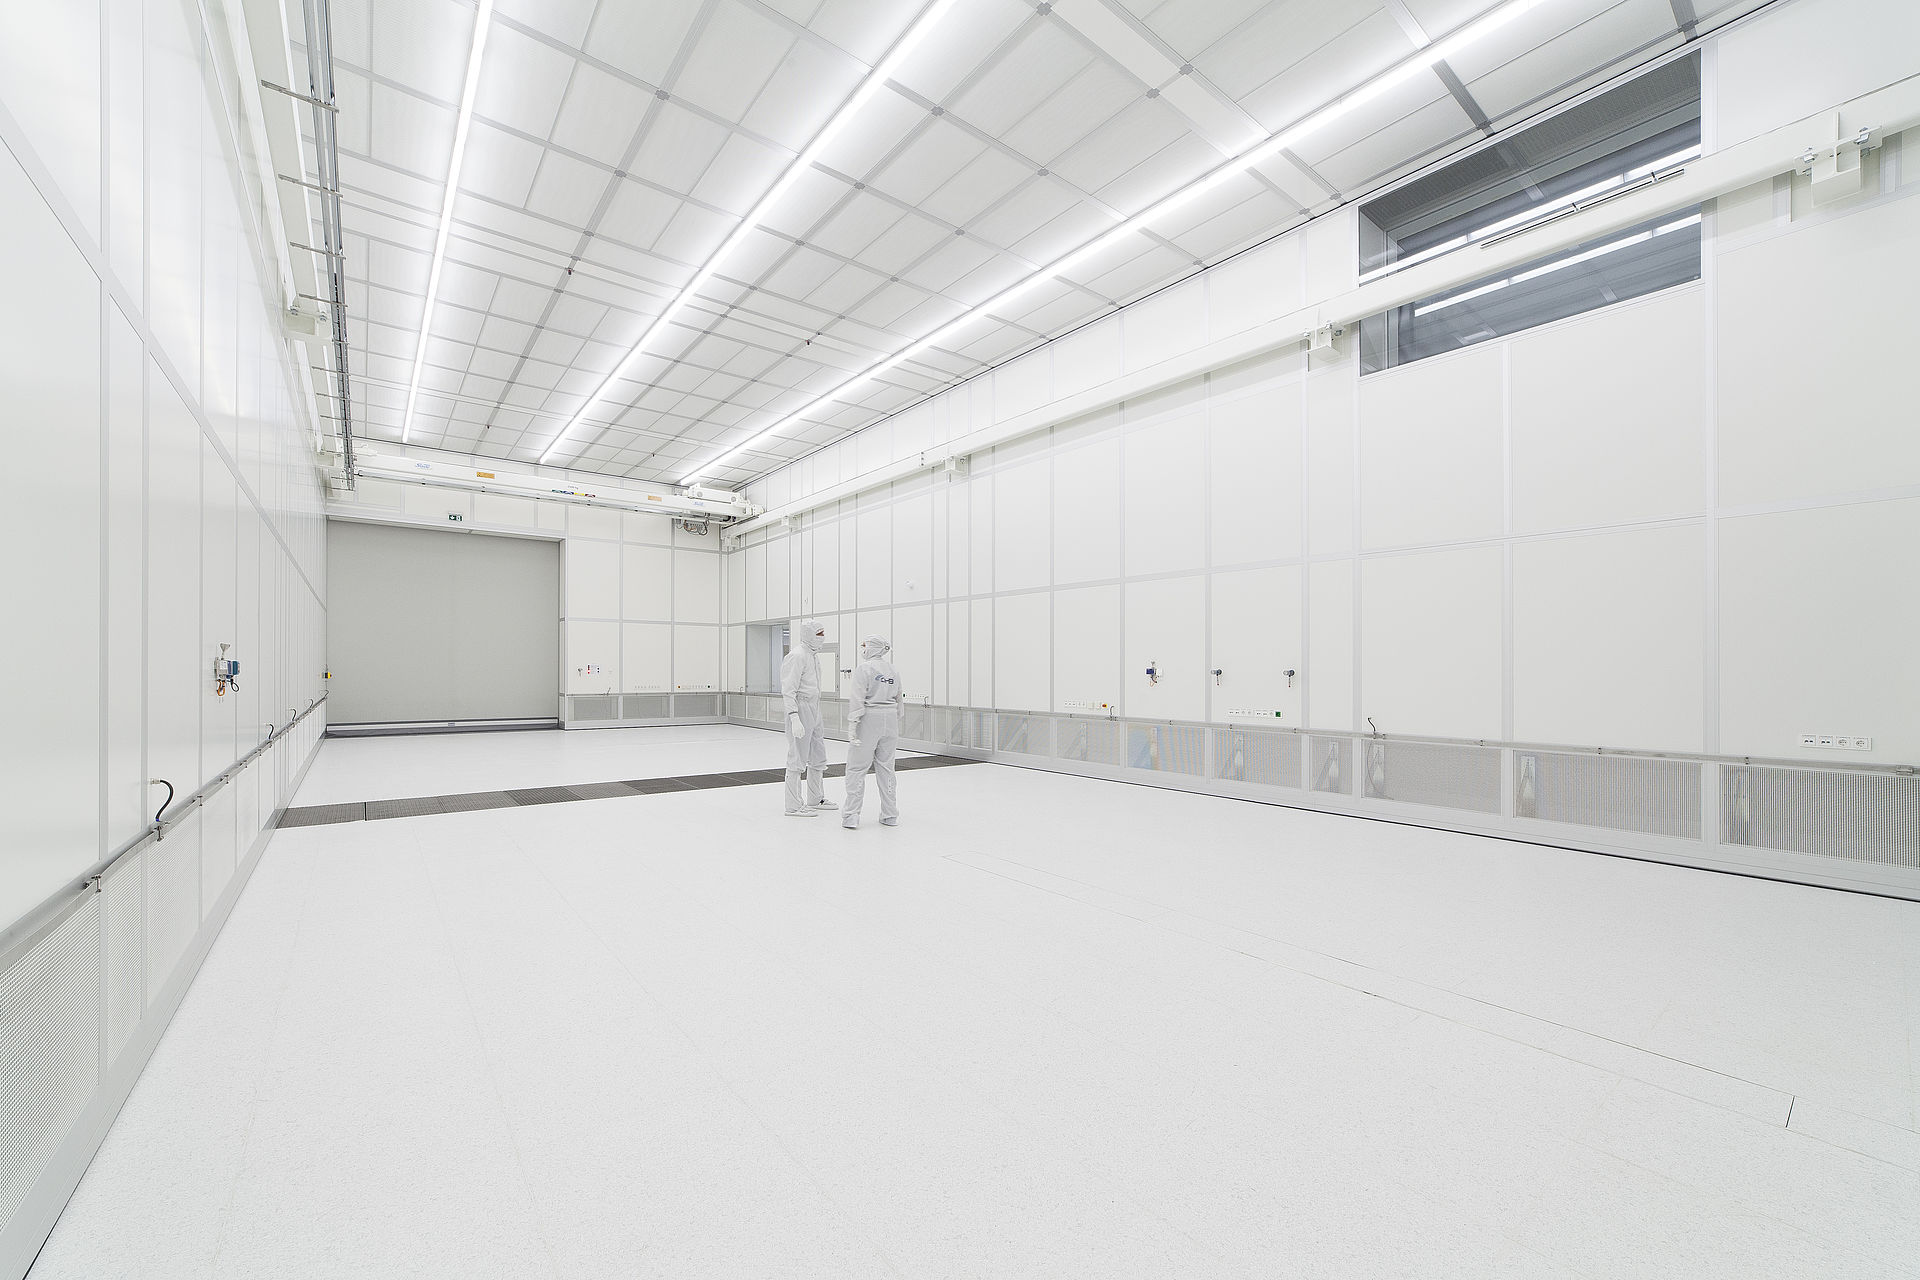 Better air quality with clean room technology? - Part 1 of #TwoMinutesOfSpace Season 2 with Carsten Borowy and Charlotte Bewick